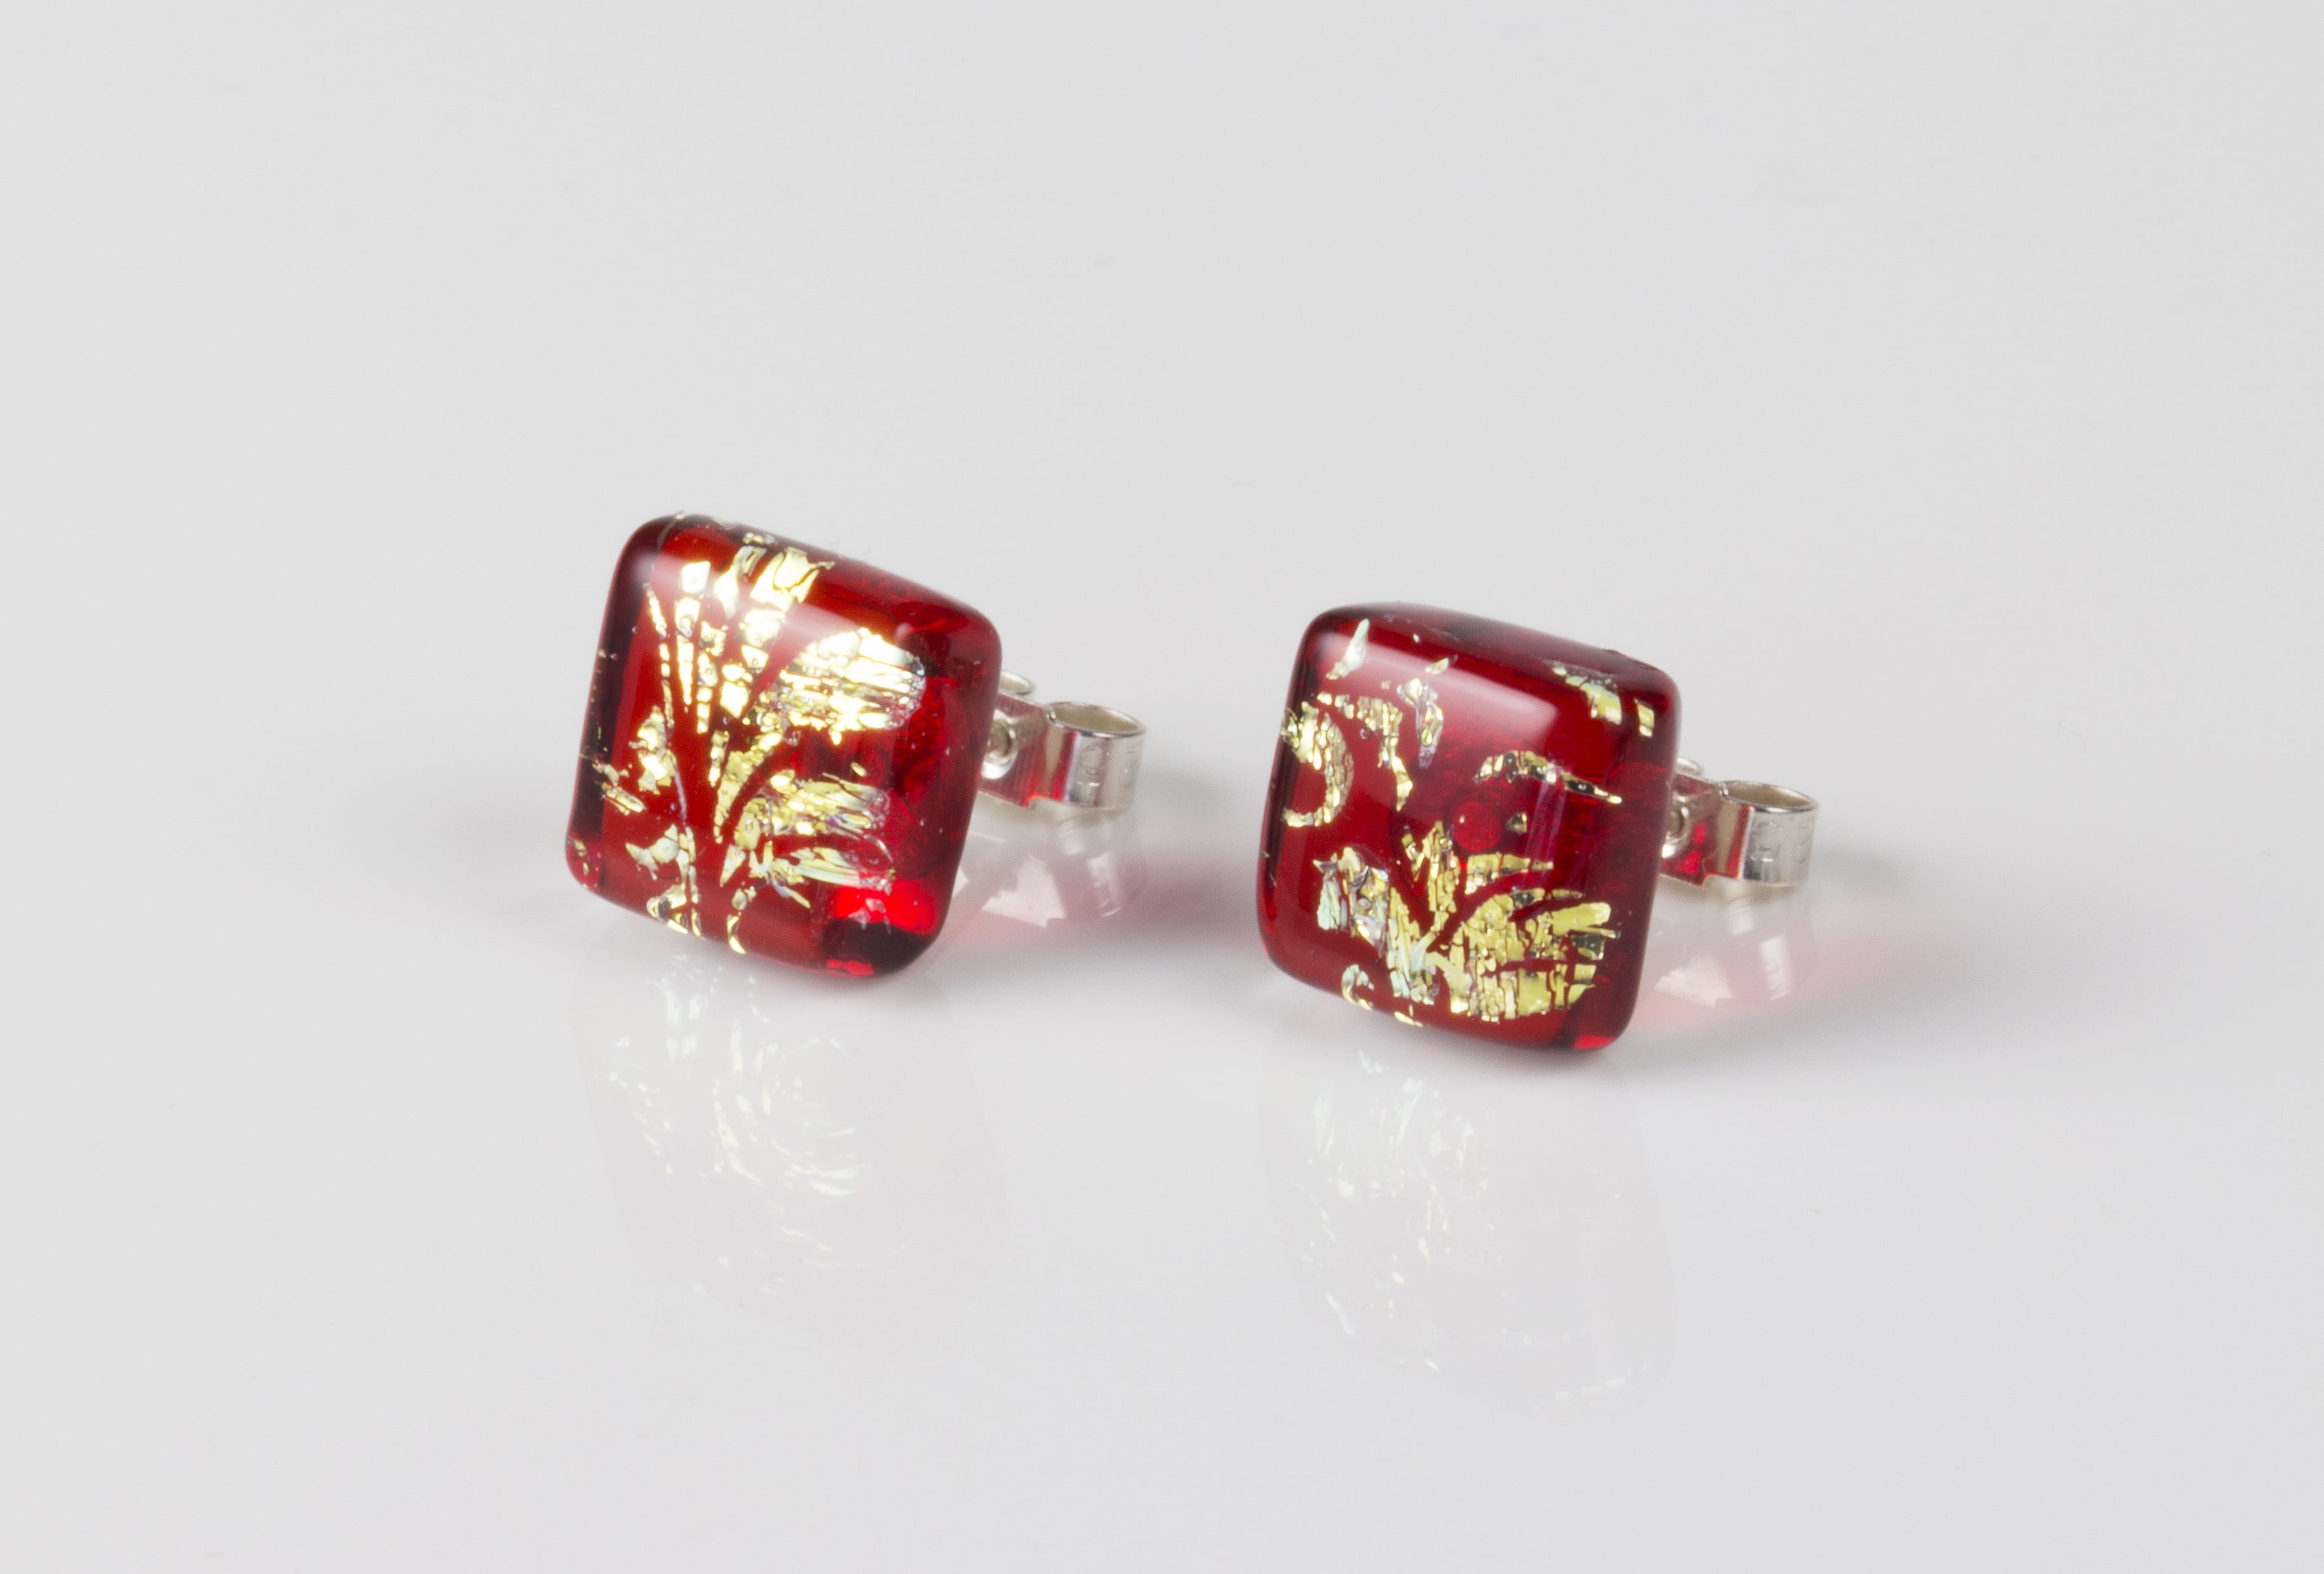 Dichroic glass jewellery uk, handmade stud earrings - red topped with gold plume pattern. Square, glass 8-11mm, sterling silver